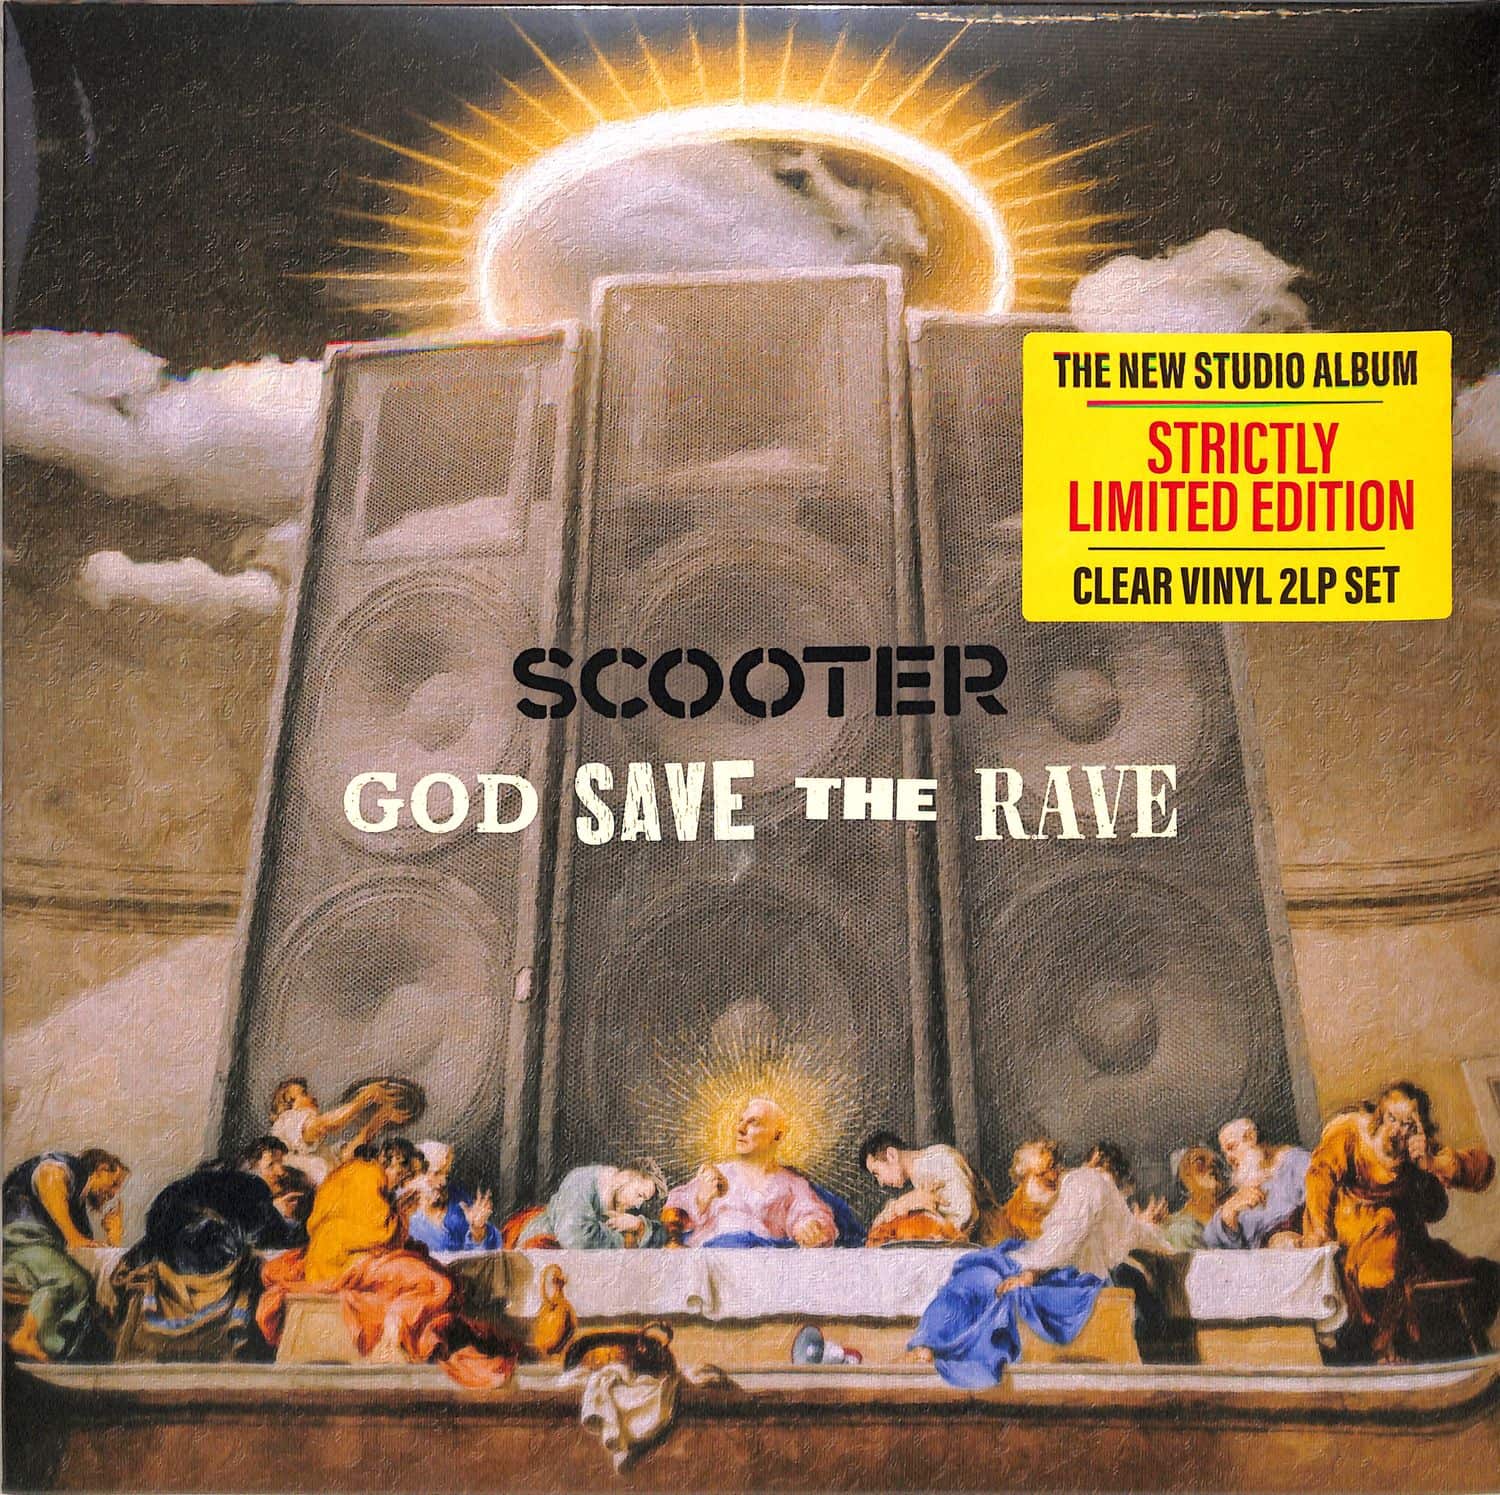 Scooter - GOD SAVE THE RAVE 